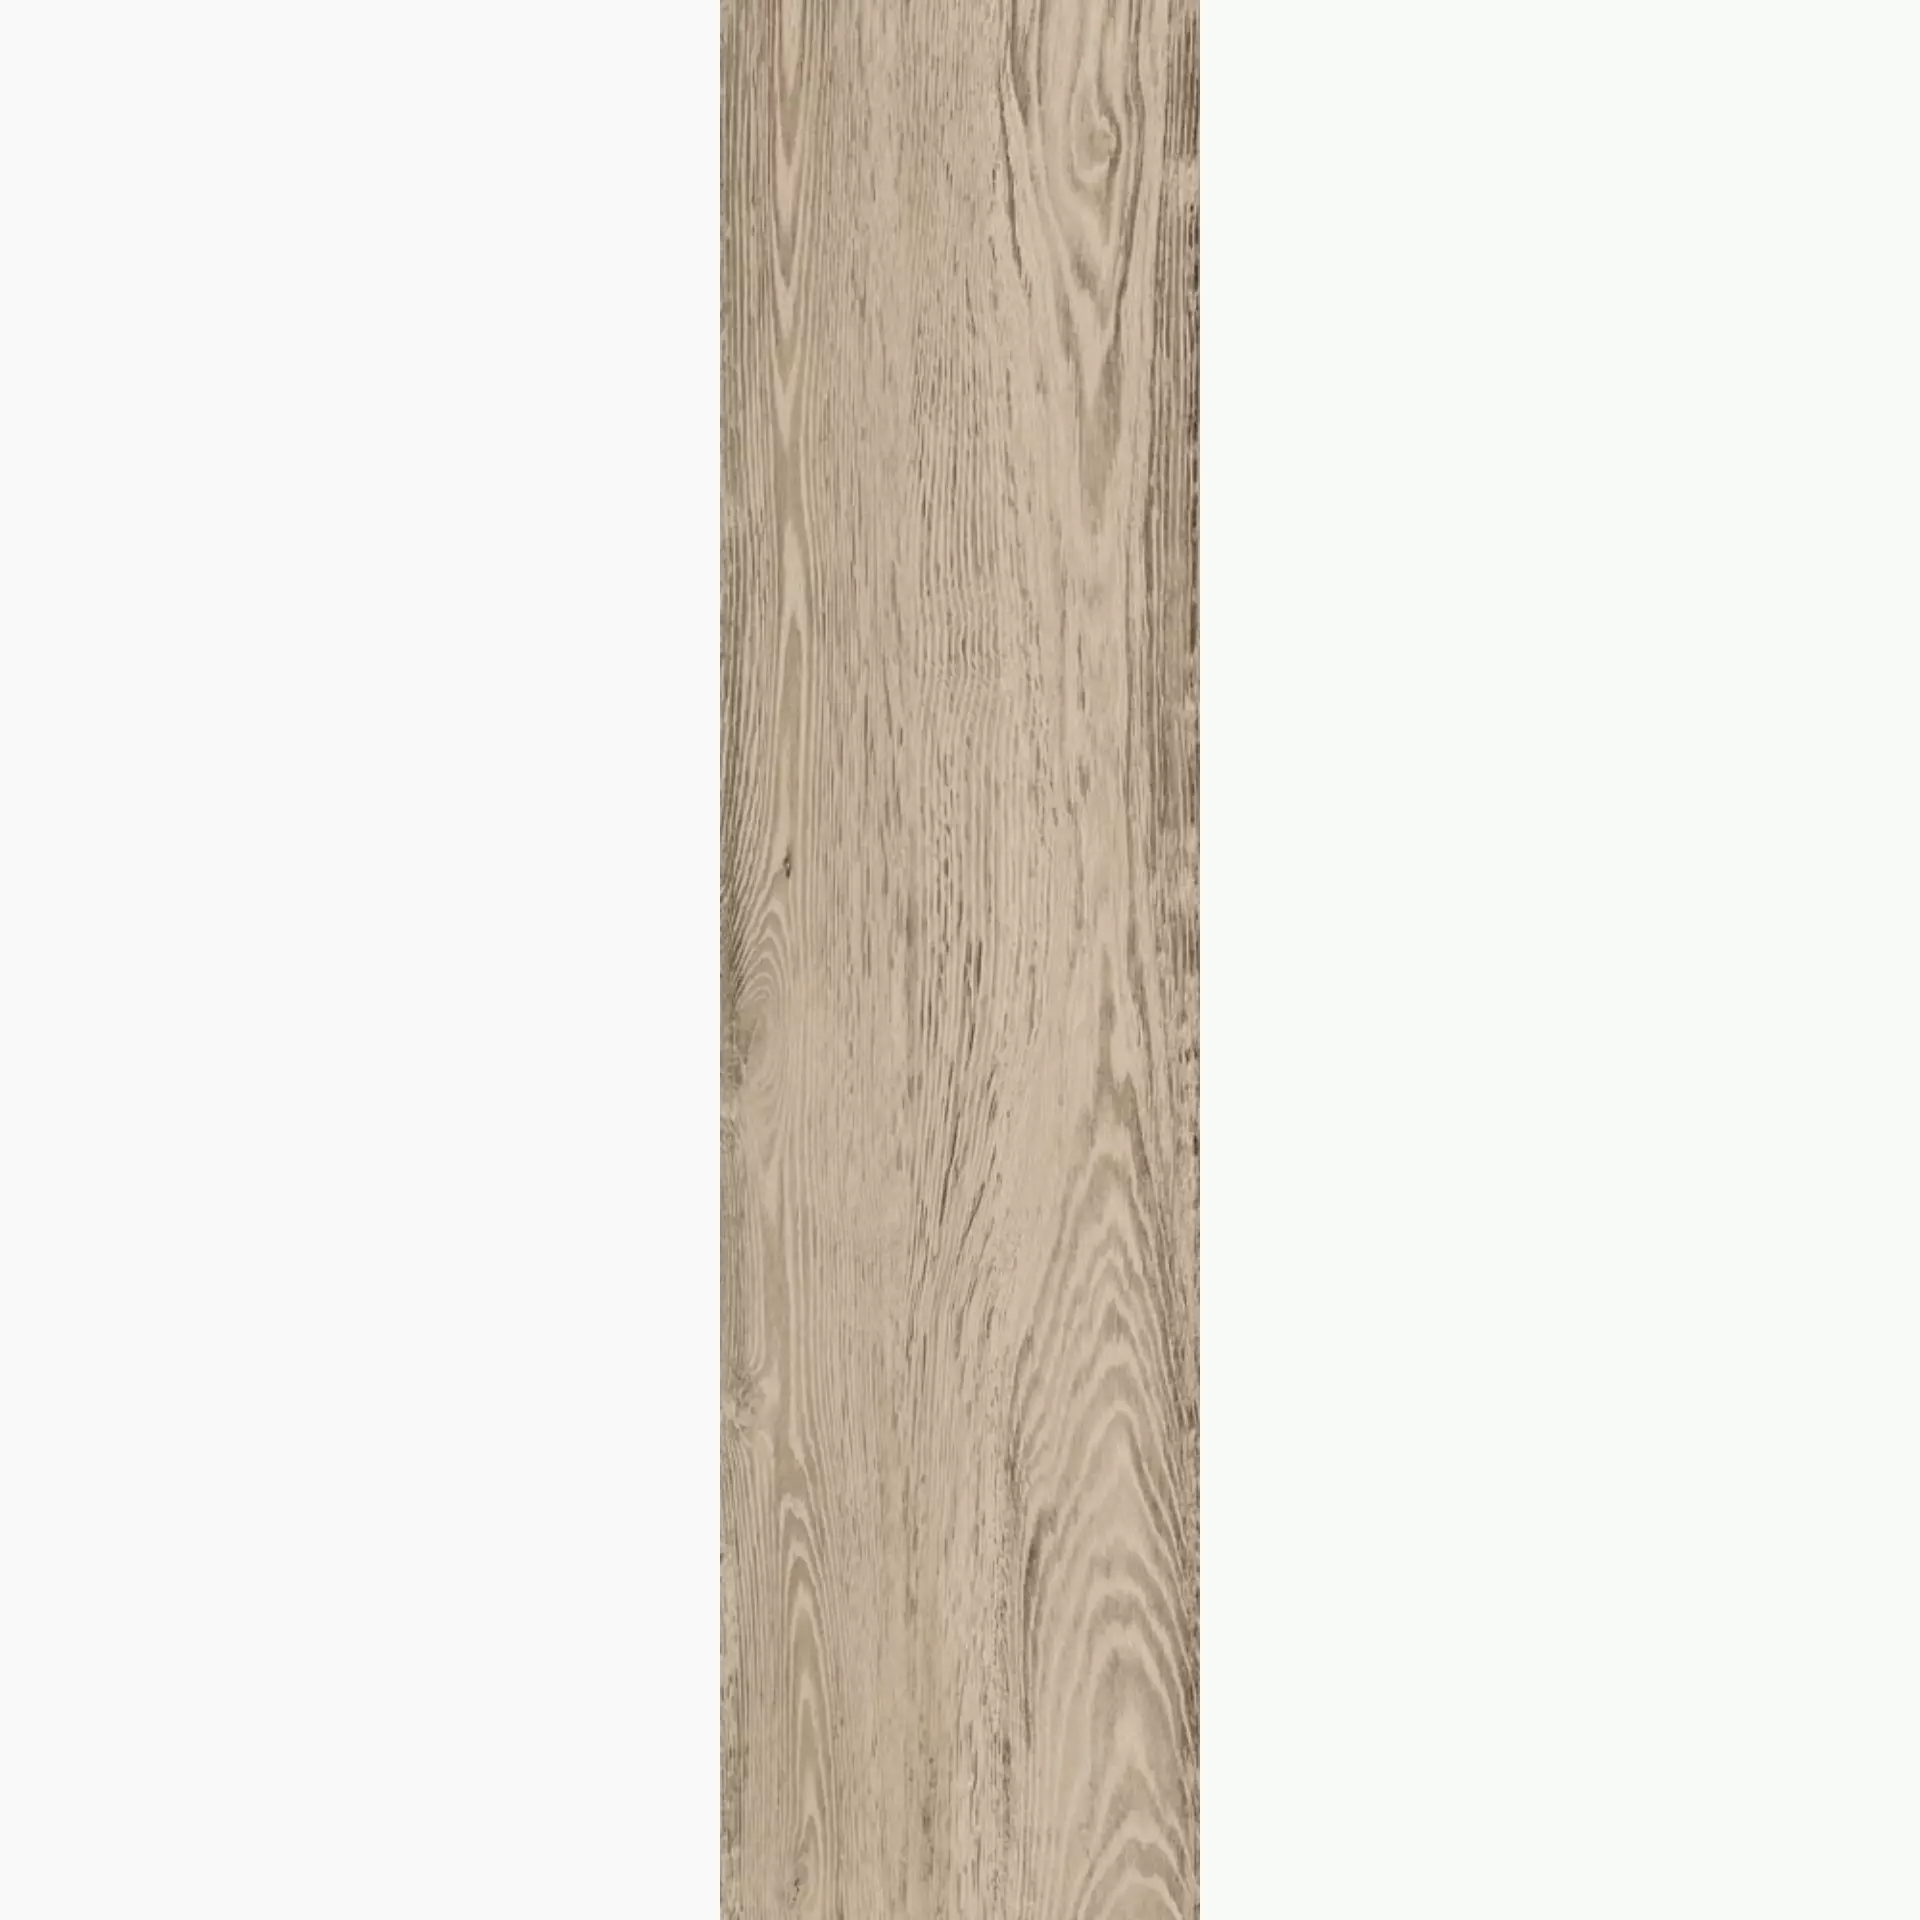 Sant Agostino Sunwood Almond Natural CSASNA3012 30x120cm rectified 9mm